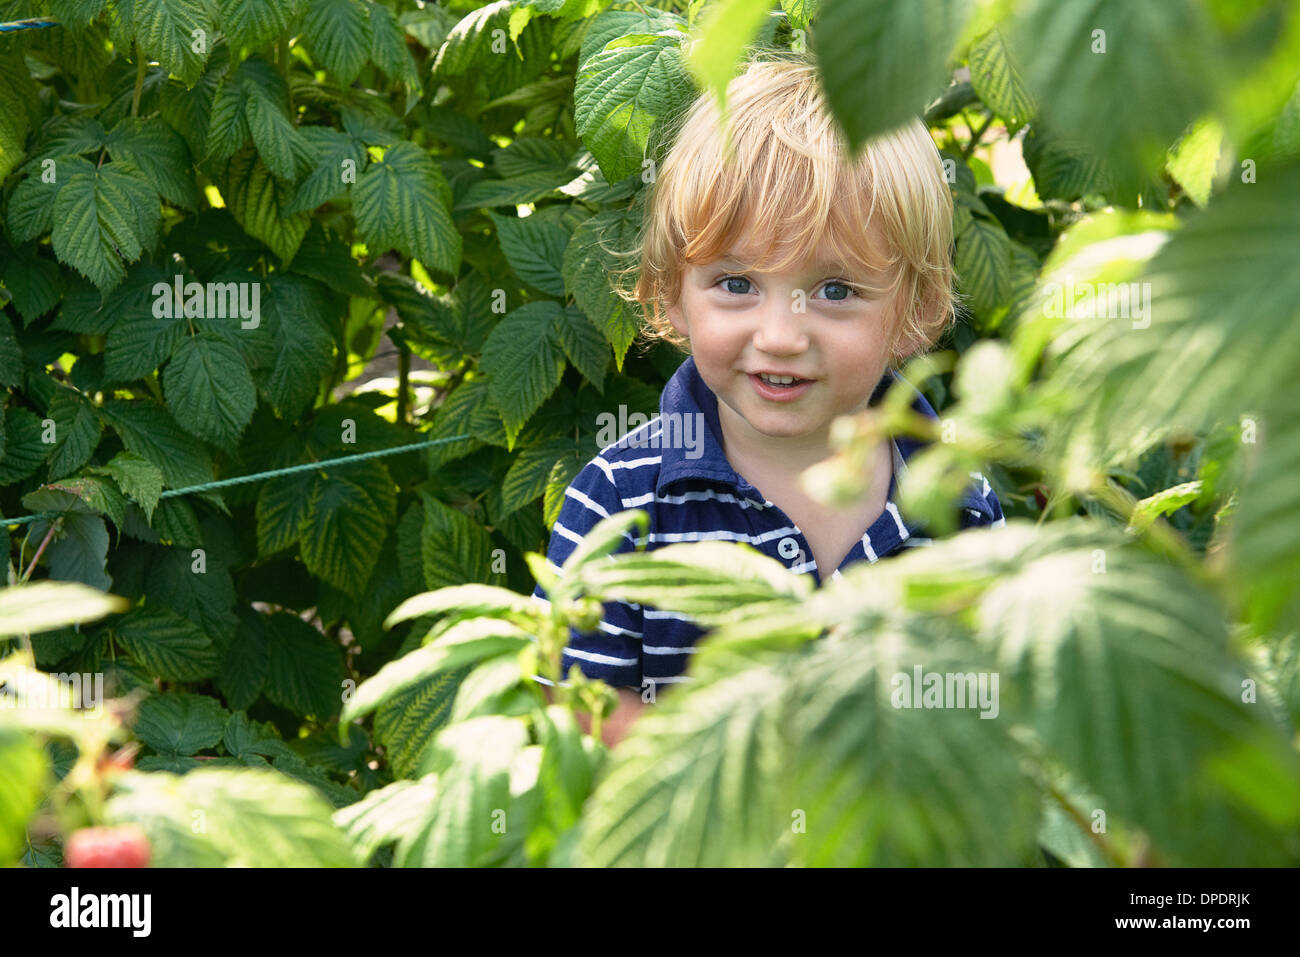 Young boy playing in garden Stock Photo